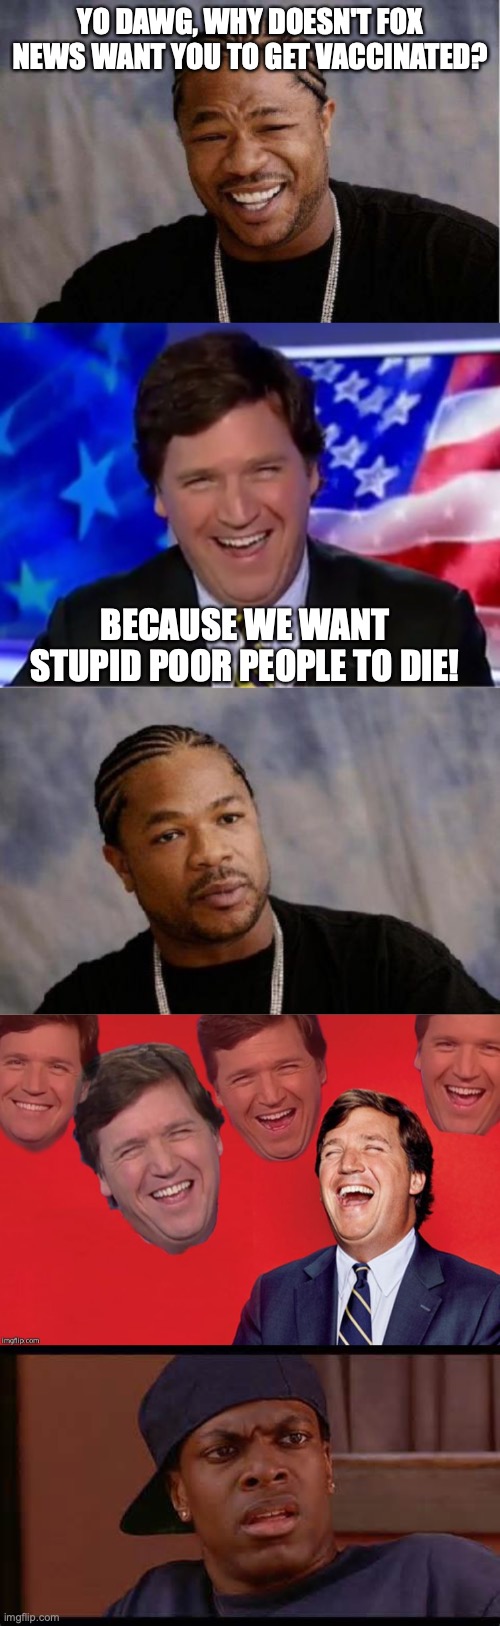 YO DAWG, WHY DOESN'T FOX NEWS WANT YOU TO GET VACCINATED? BECAUSE WE WANT STUPID POOR PEOPLE TO DIE! | image tagged in memes,yo dawg heard you,tucker carlson,serious xzibit,tucker laughs at libs,smokey from friday chris tucker | made w/ Imgflip meme maker